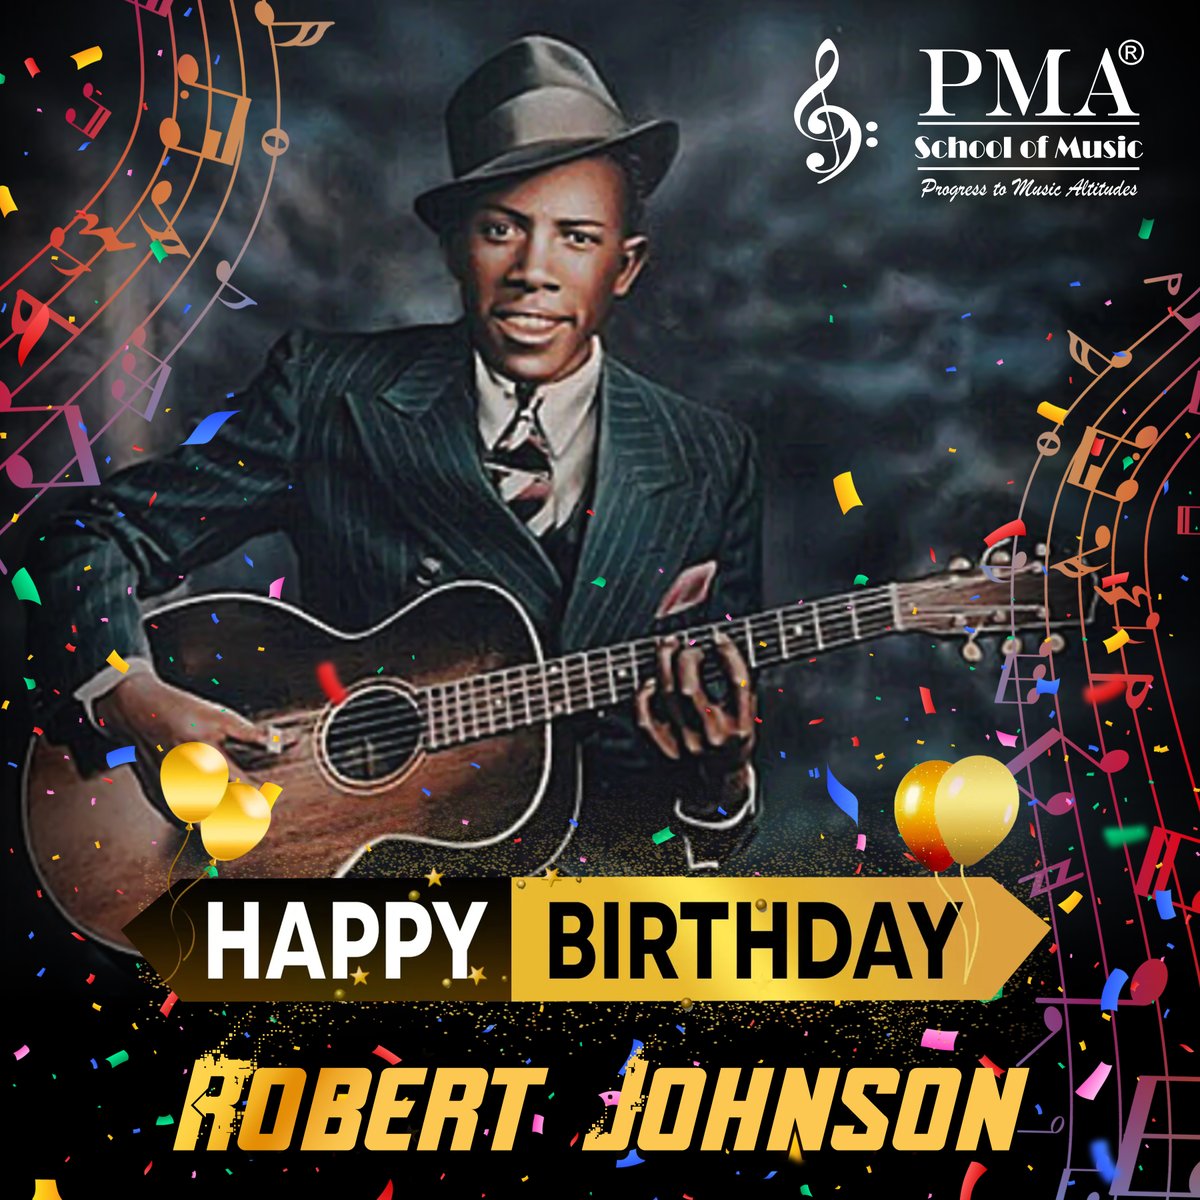 🎸🎉 Today, we honor the king of blues guitar, Robert Johnson, on what would have been his birthday! His timeless riffs and profound impact on music live on. Play a Johnson track today and feel the magic! 🎶 #RobertJohnson #BluesLegend #PMASchoolOfMusic #MUSICHISTORY #Spotify